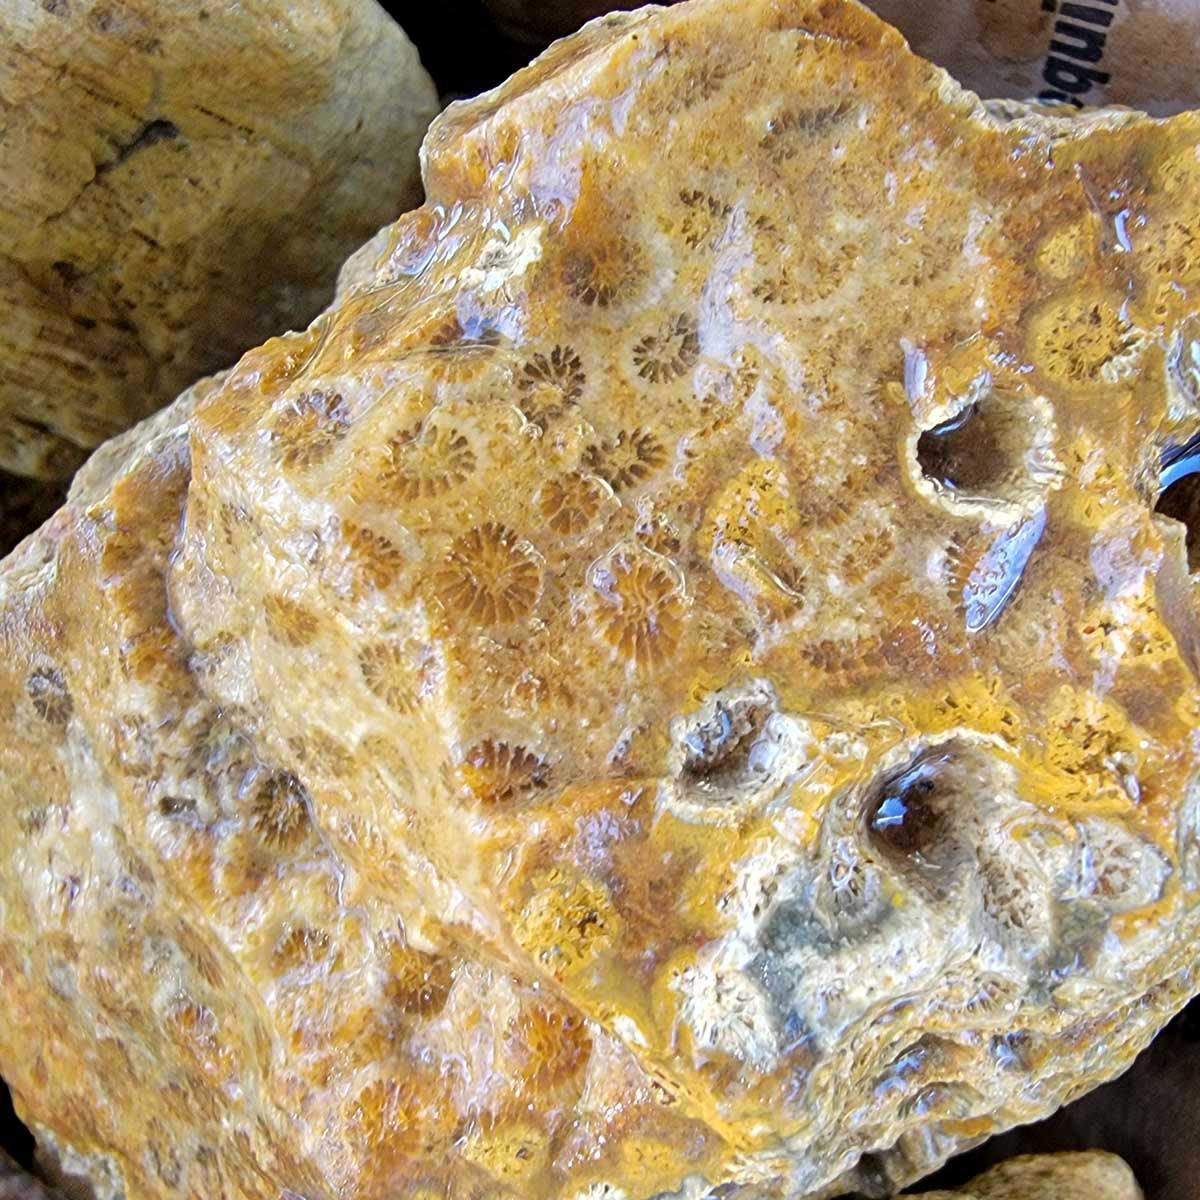 Indonesian Fossil Coral Rough Flatrate! - LapidaryCentral